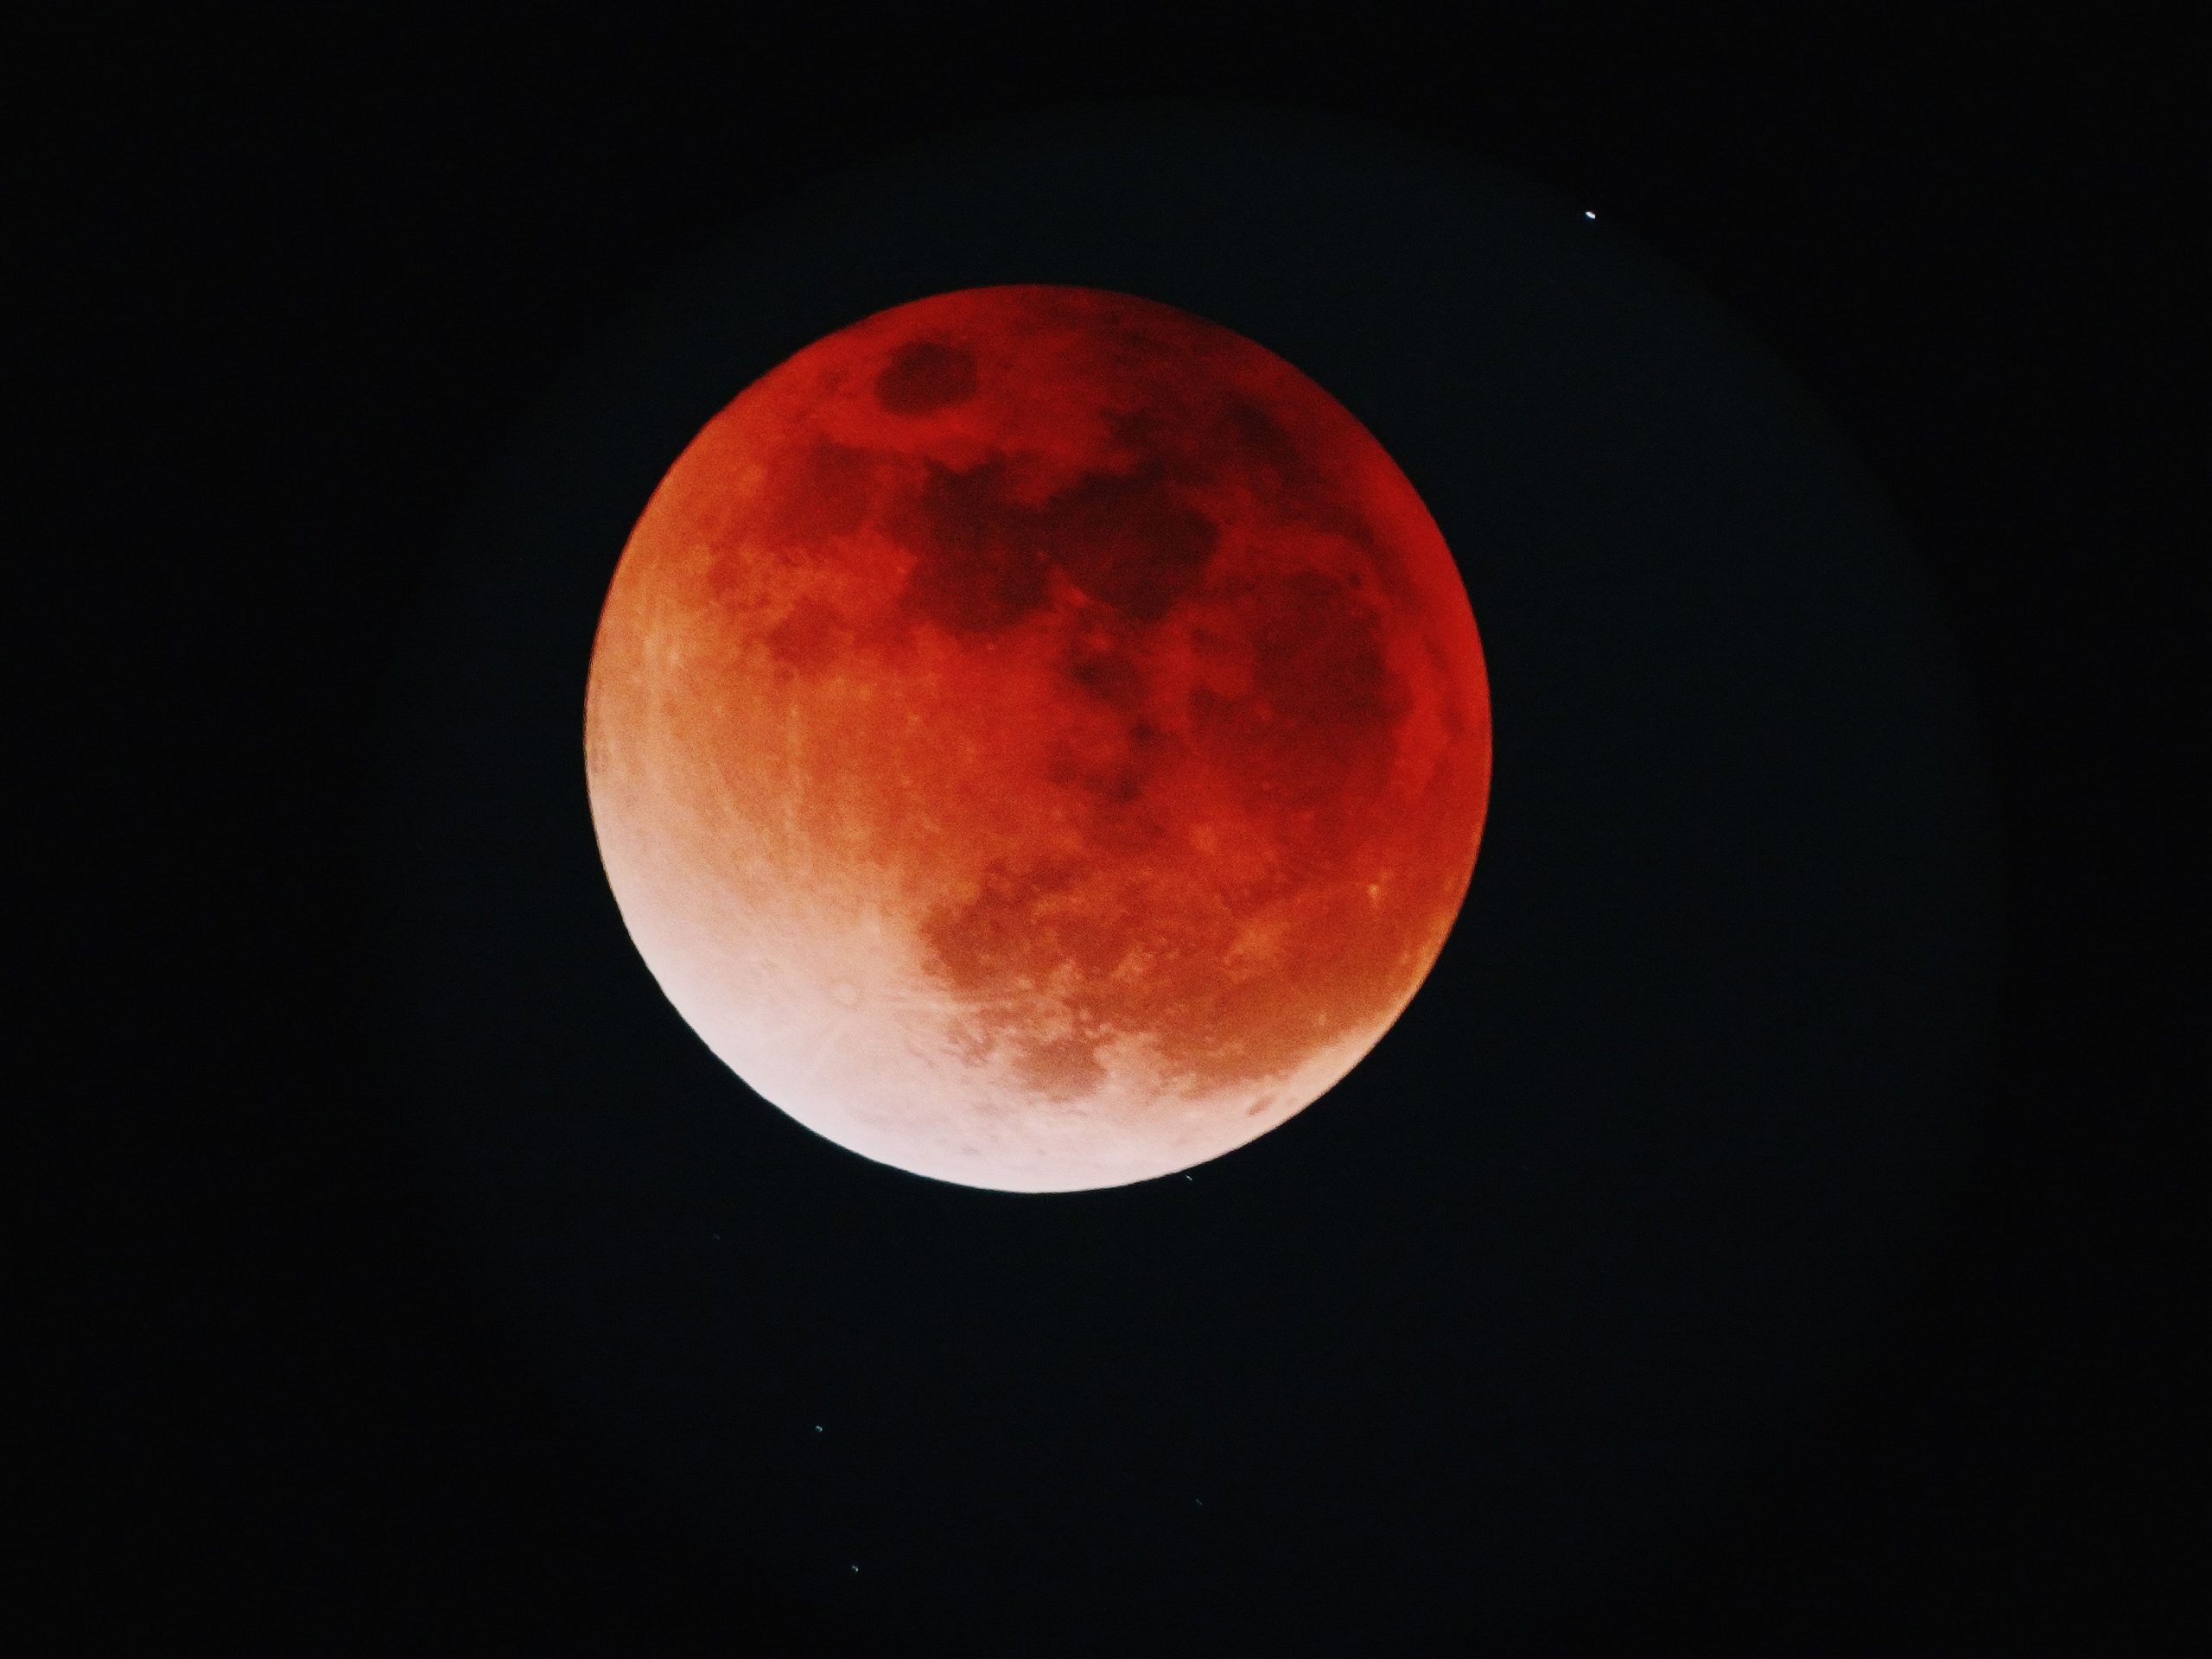 November 8 to see year’s last lunar eclipse